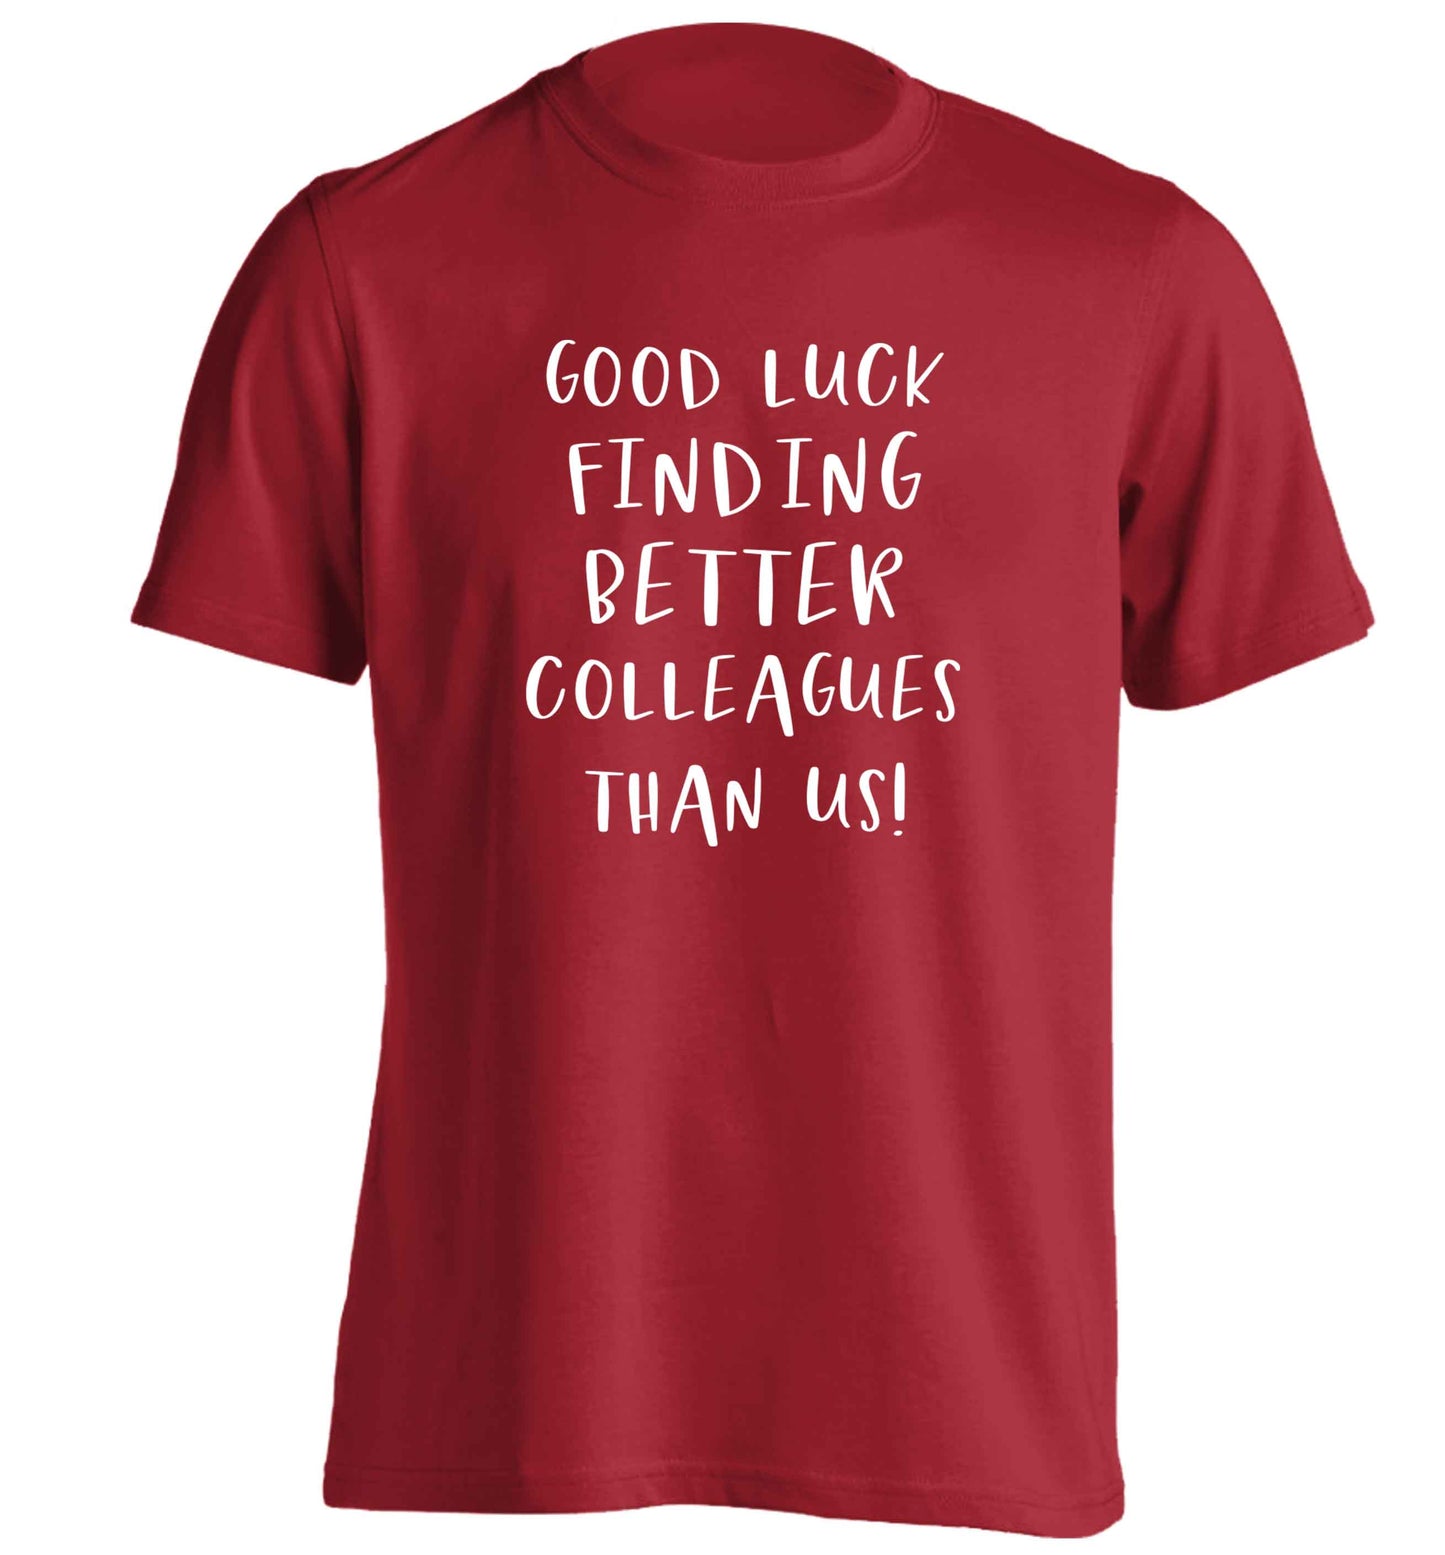 Good luck finding better colleagues than us! adults unisex red Tshirt 2XL